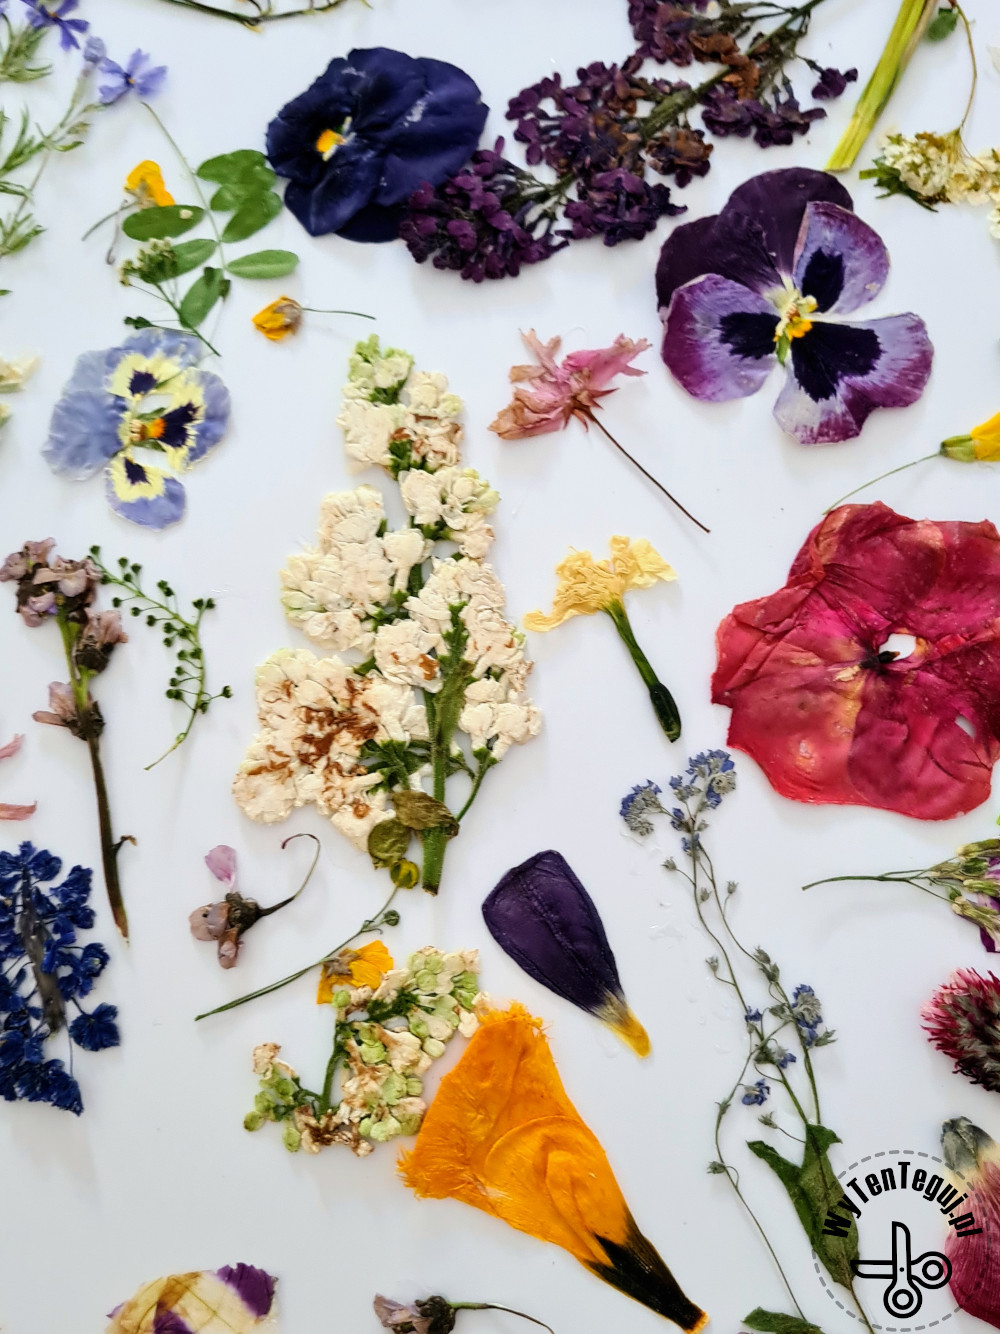 How to make pressed flowers art?